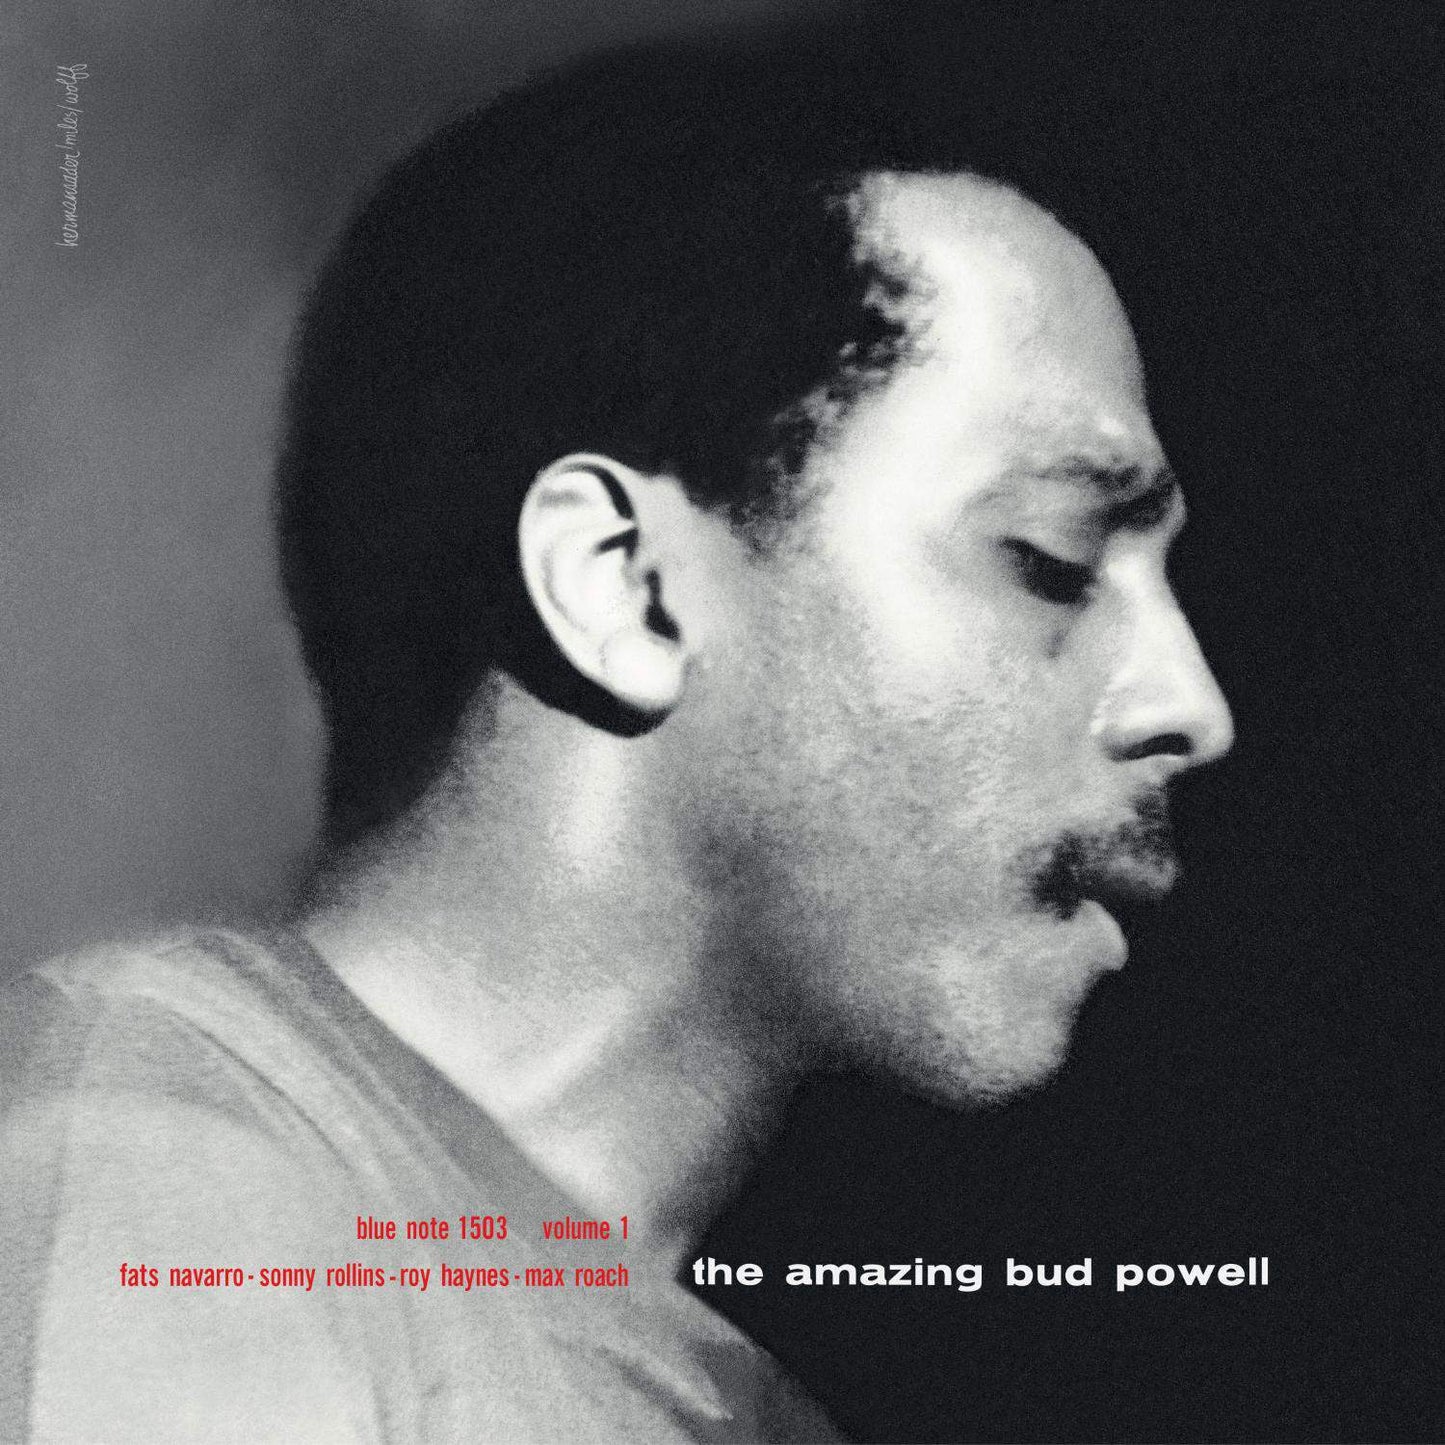 Bud Powell - Amazing Bud Powell, Vol. 1 | Buy the Vinyl LP from Flying Nun Records 